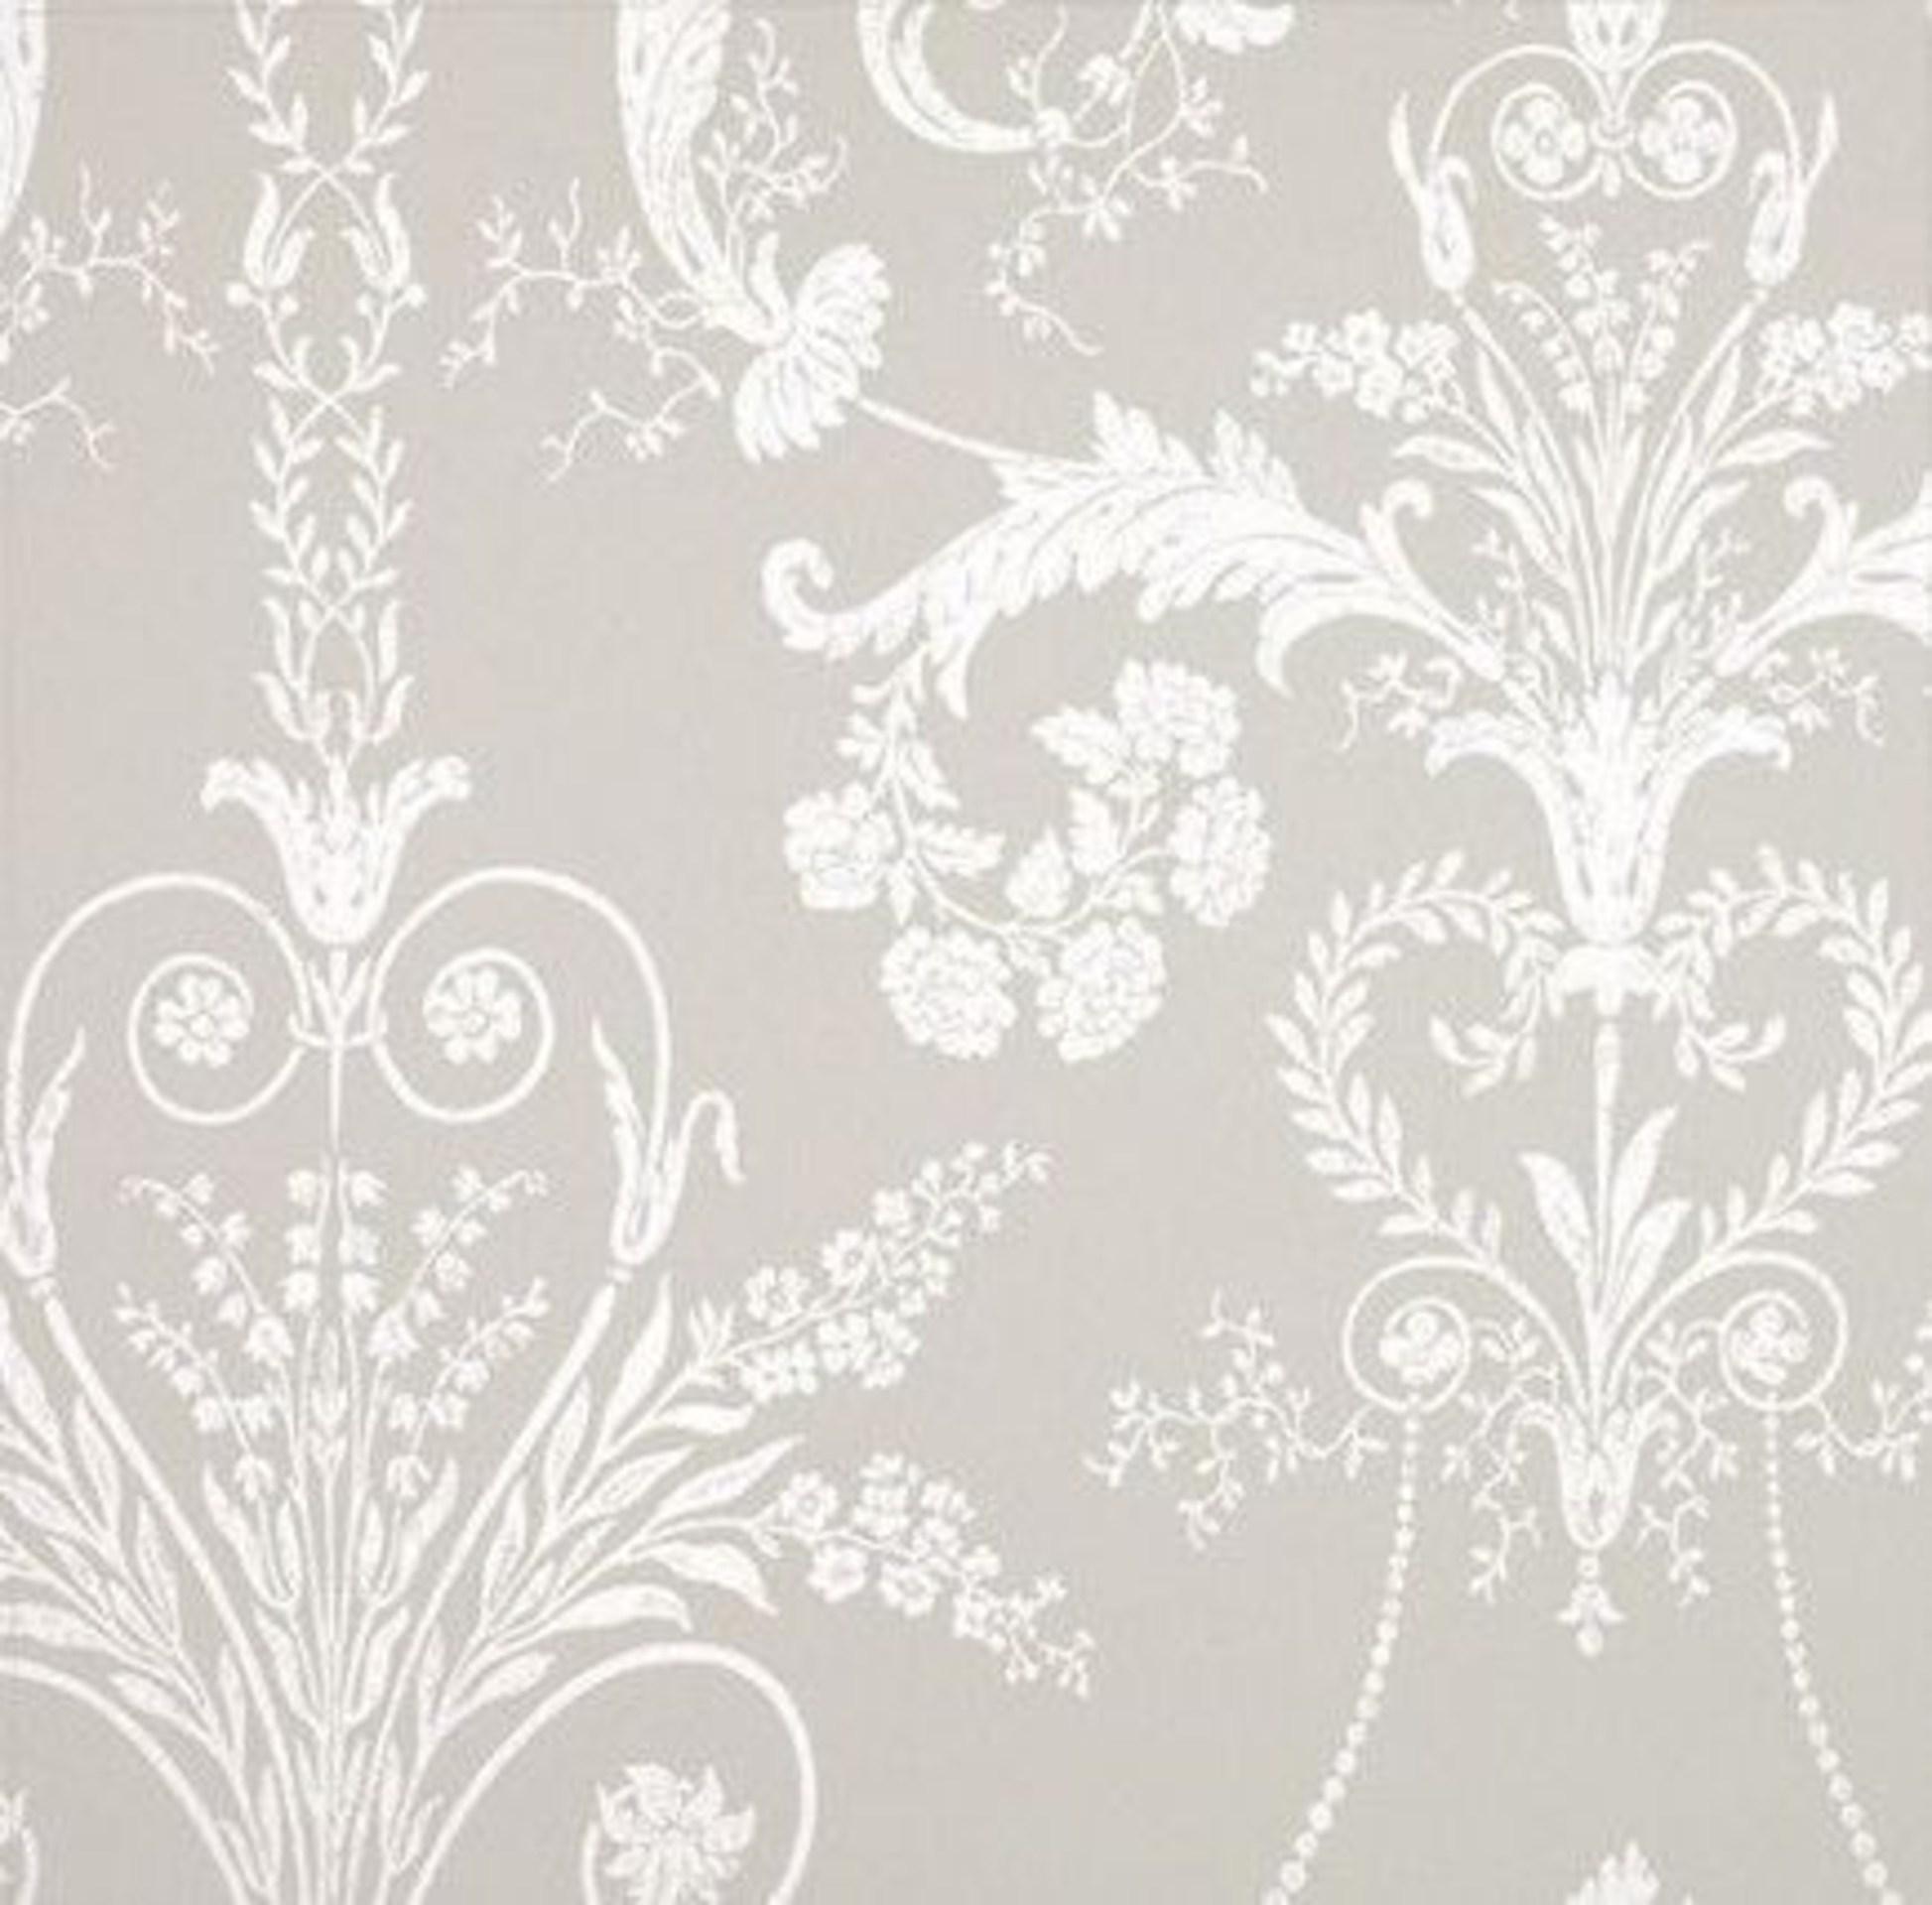 Bay Tree, A Wallpaper By Sanderson, Part Of The Potting - Sanderson Home The Potting Room - HD Wallpaper 